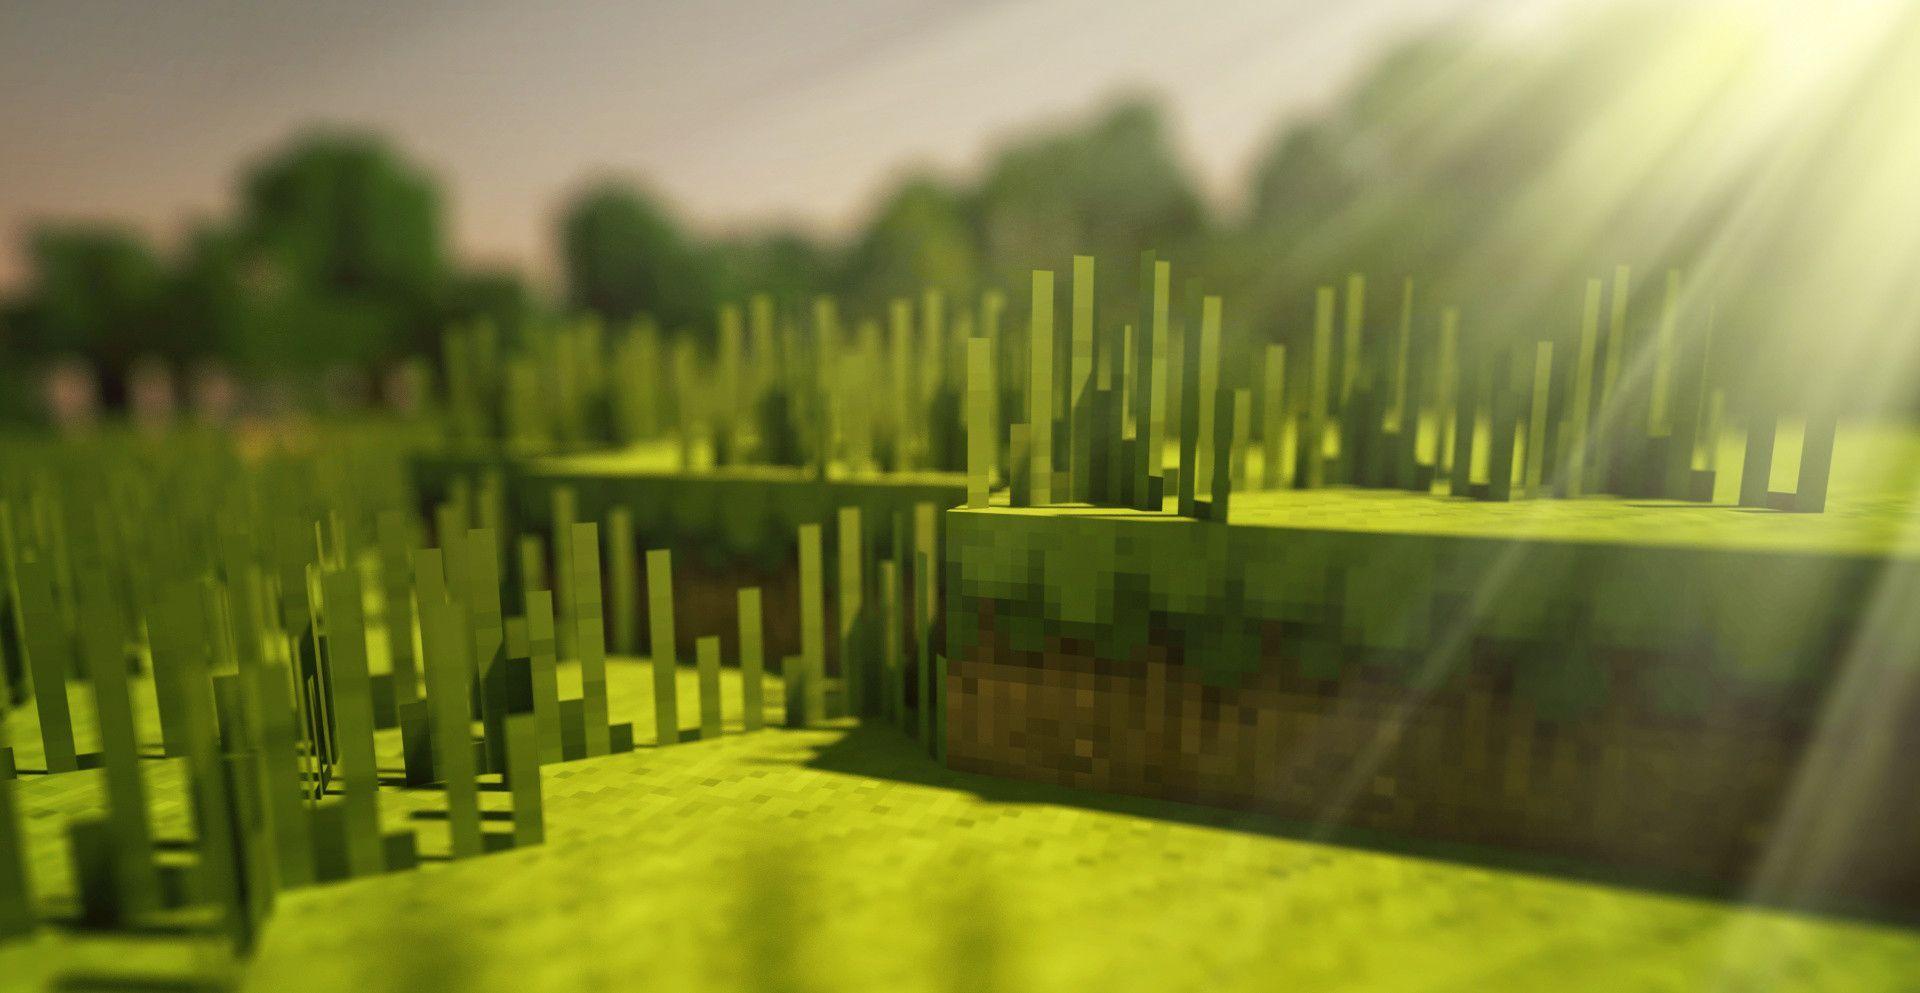 Awesome Minecraft wallpaper in HD Design Utopia Trend